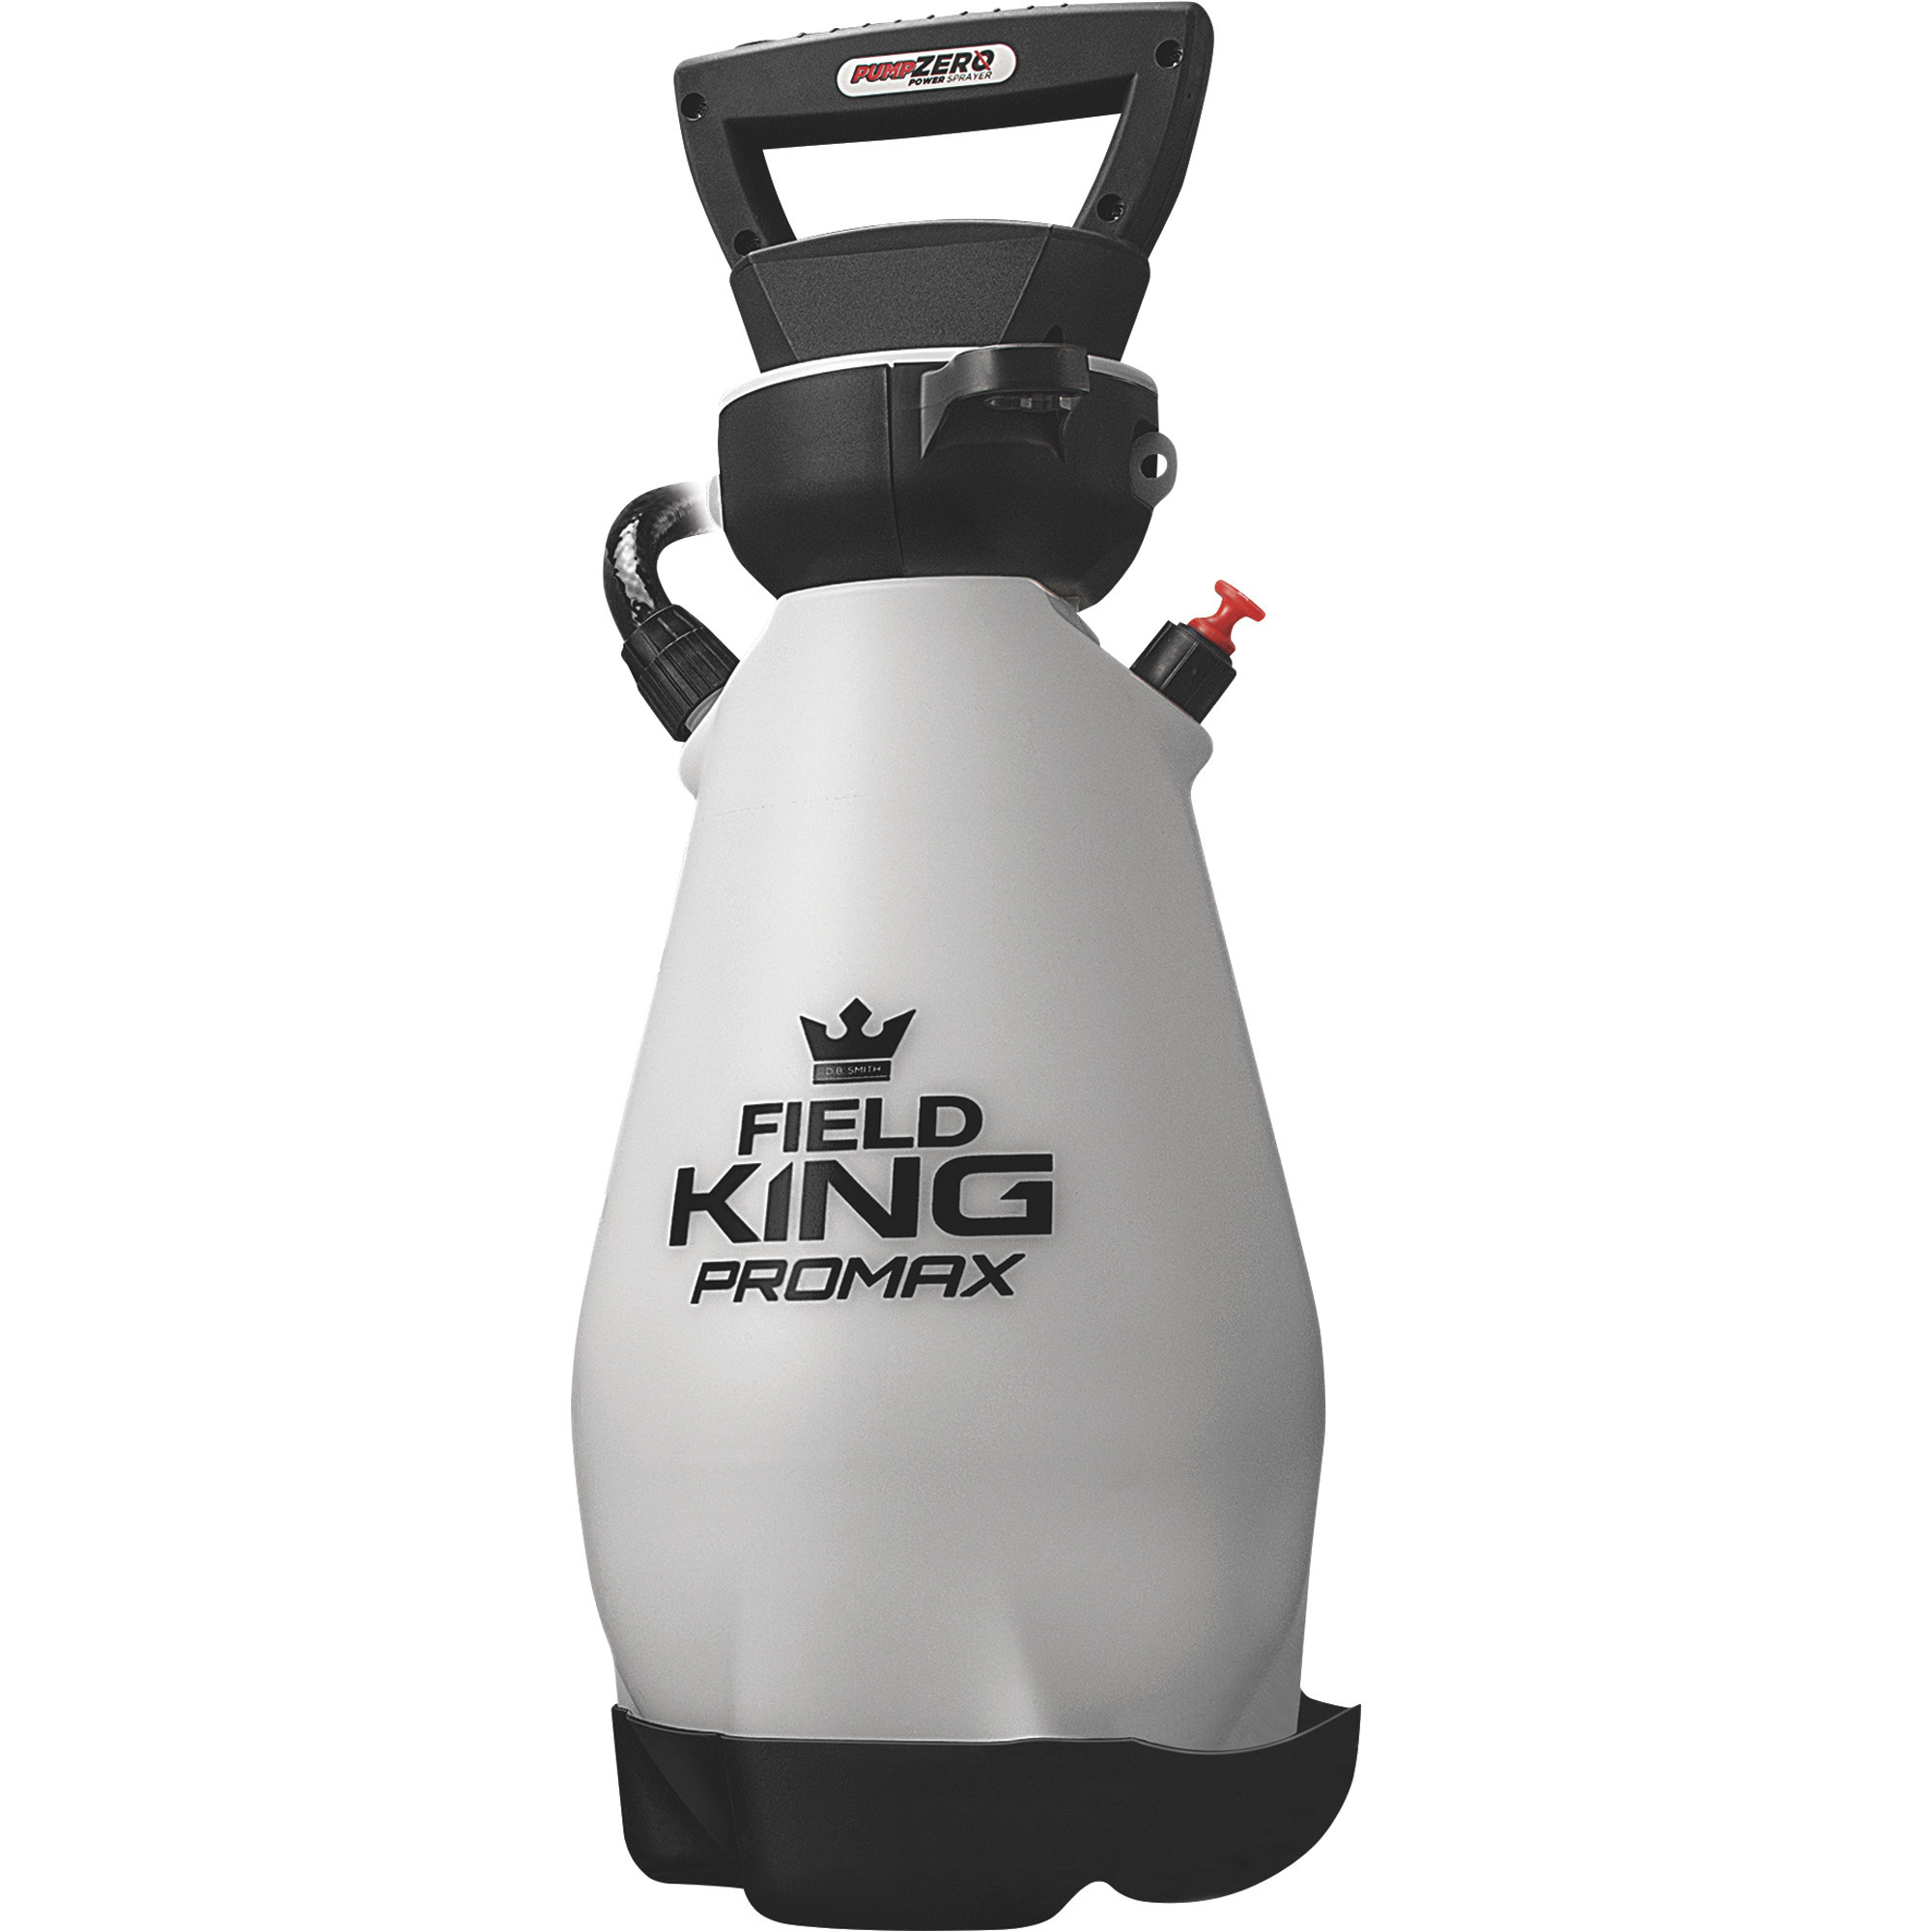 Field King PROMAX Rechargeable Lithium-Ion Handheld Sprayer, 2-Gallon Capacity, 20 PSI, Model 190571